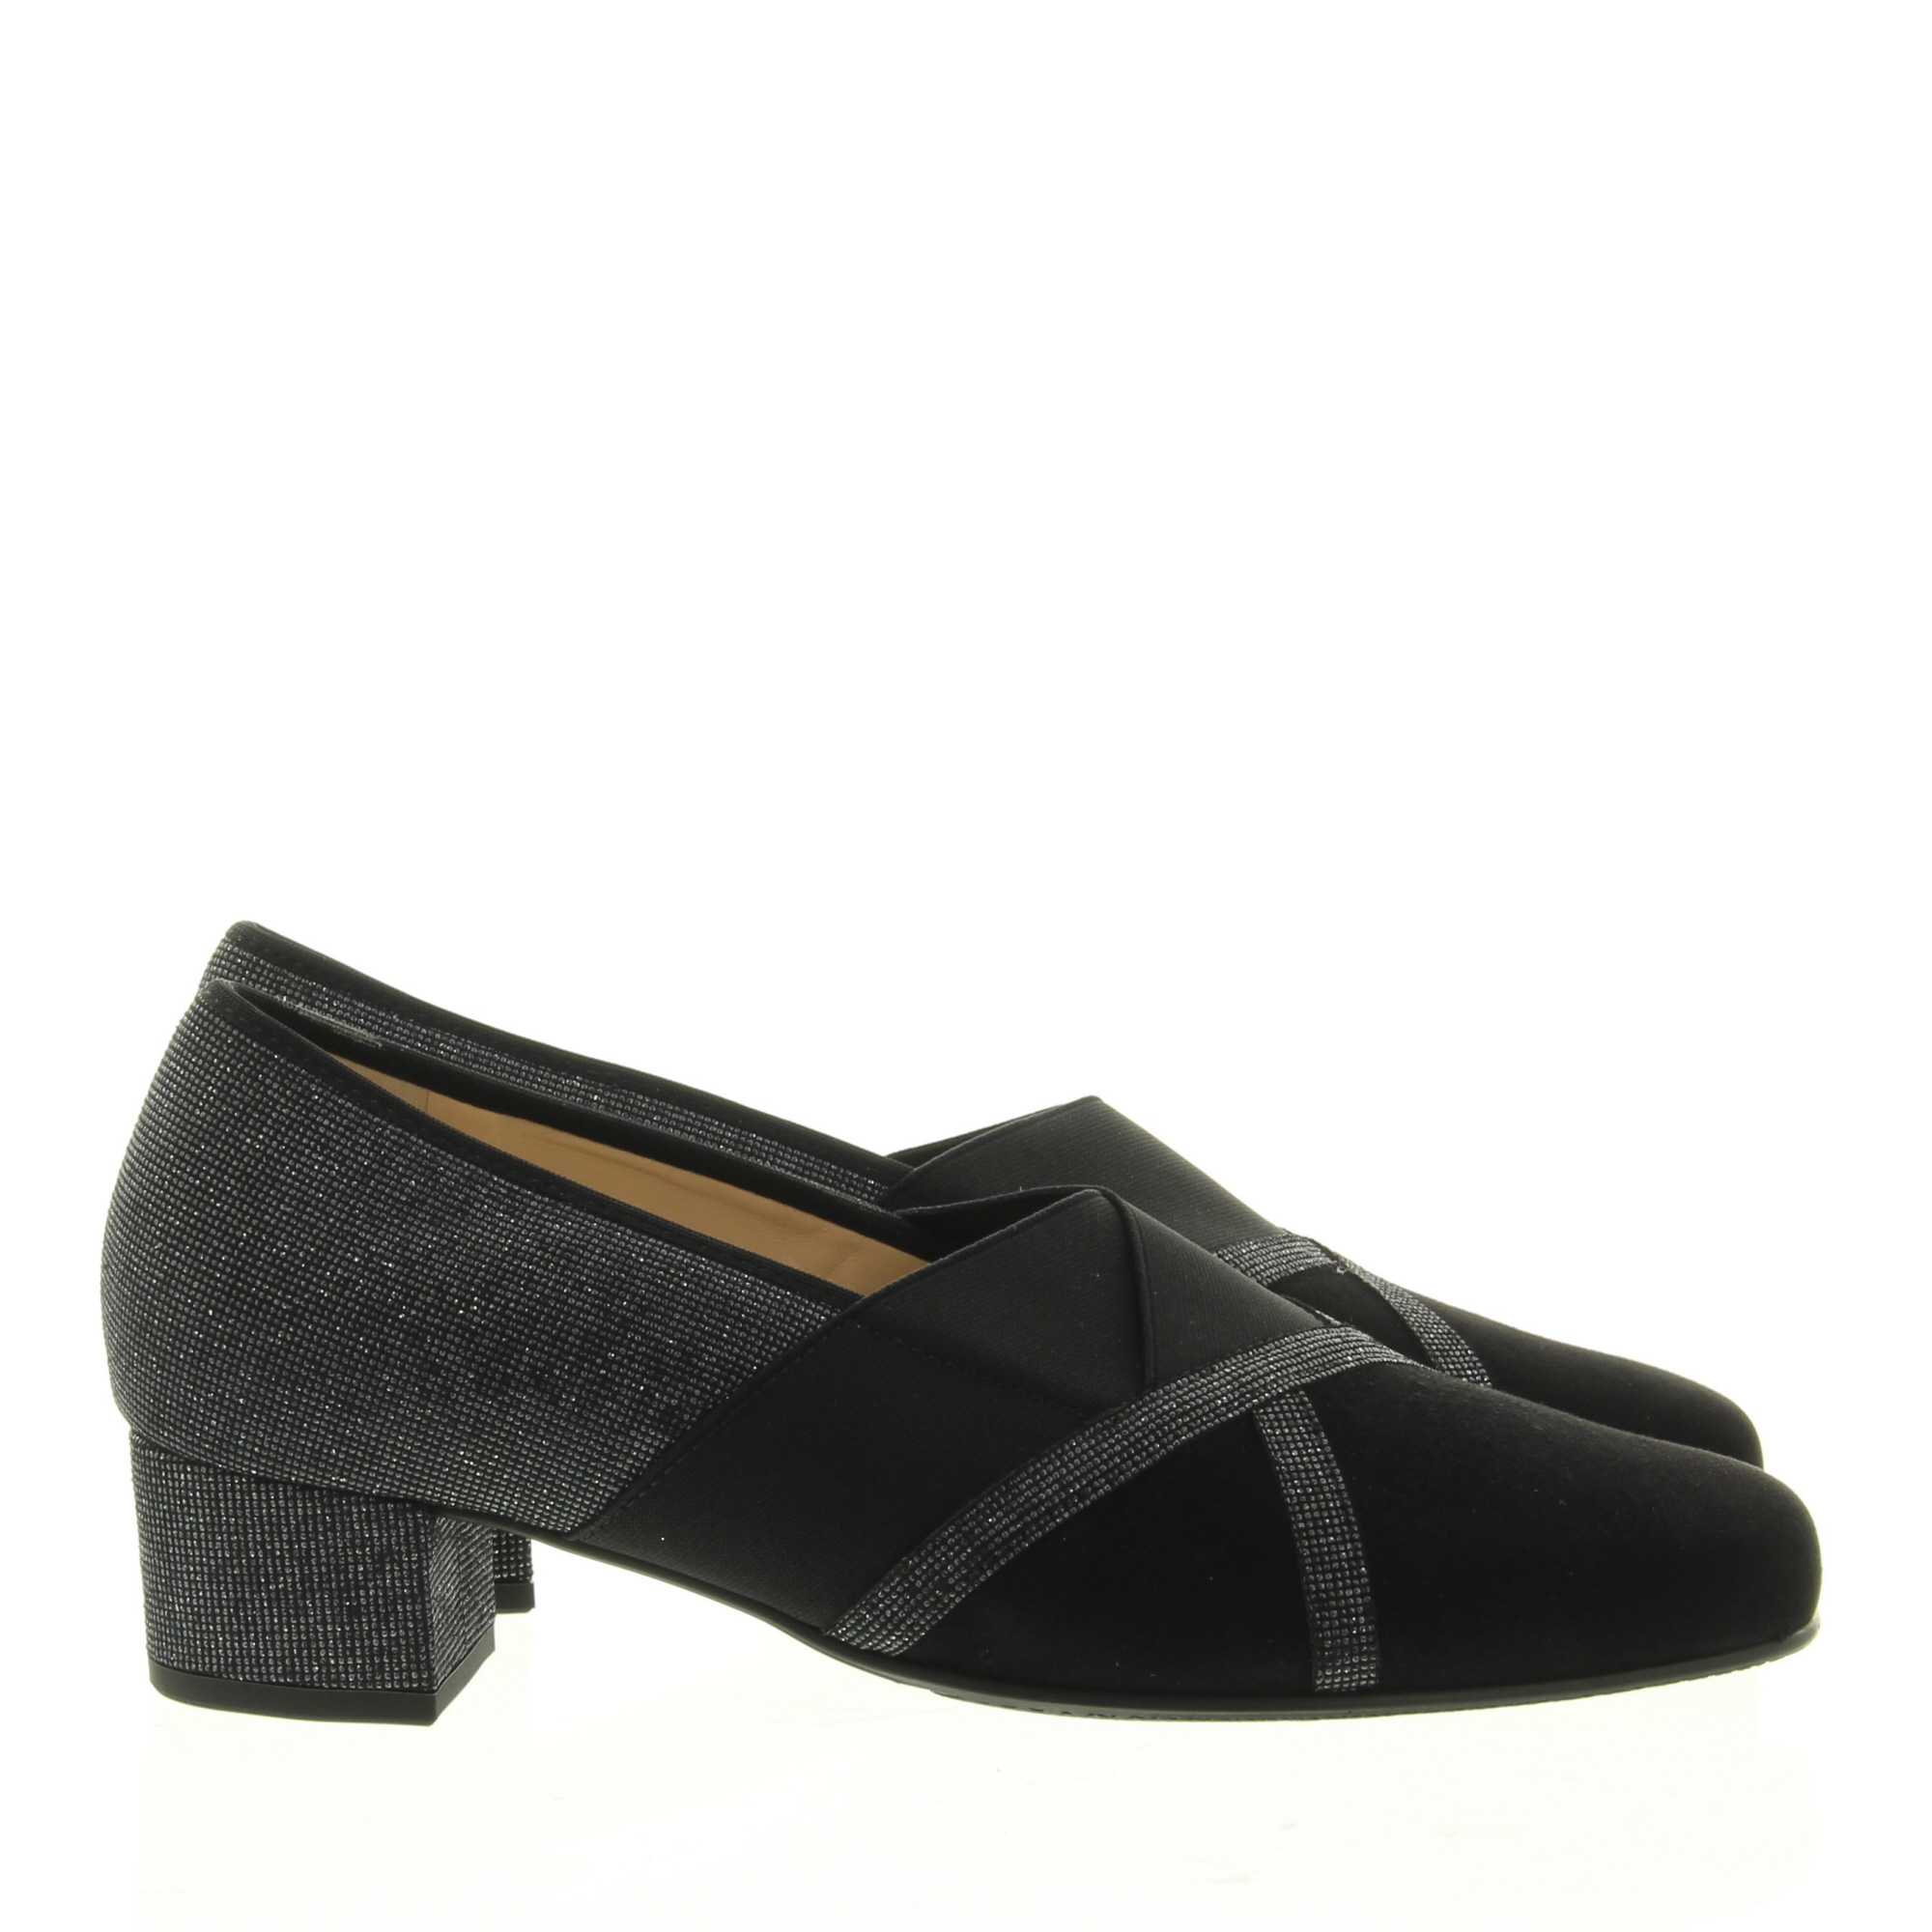 Hassia Shoes 303334 Evelyn 0100 Schwarz